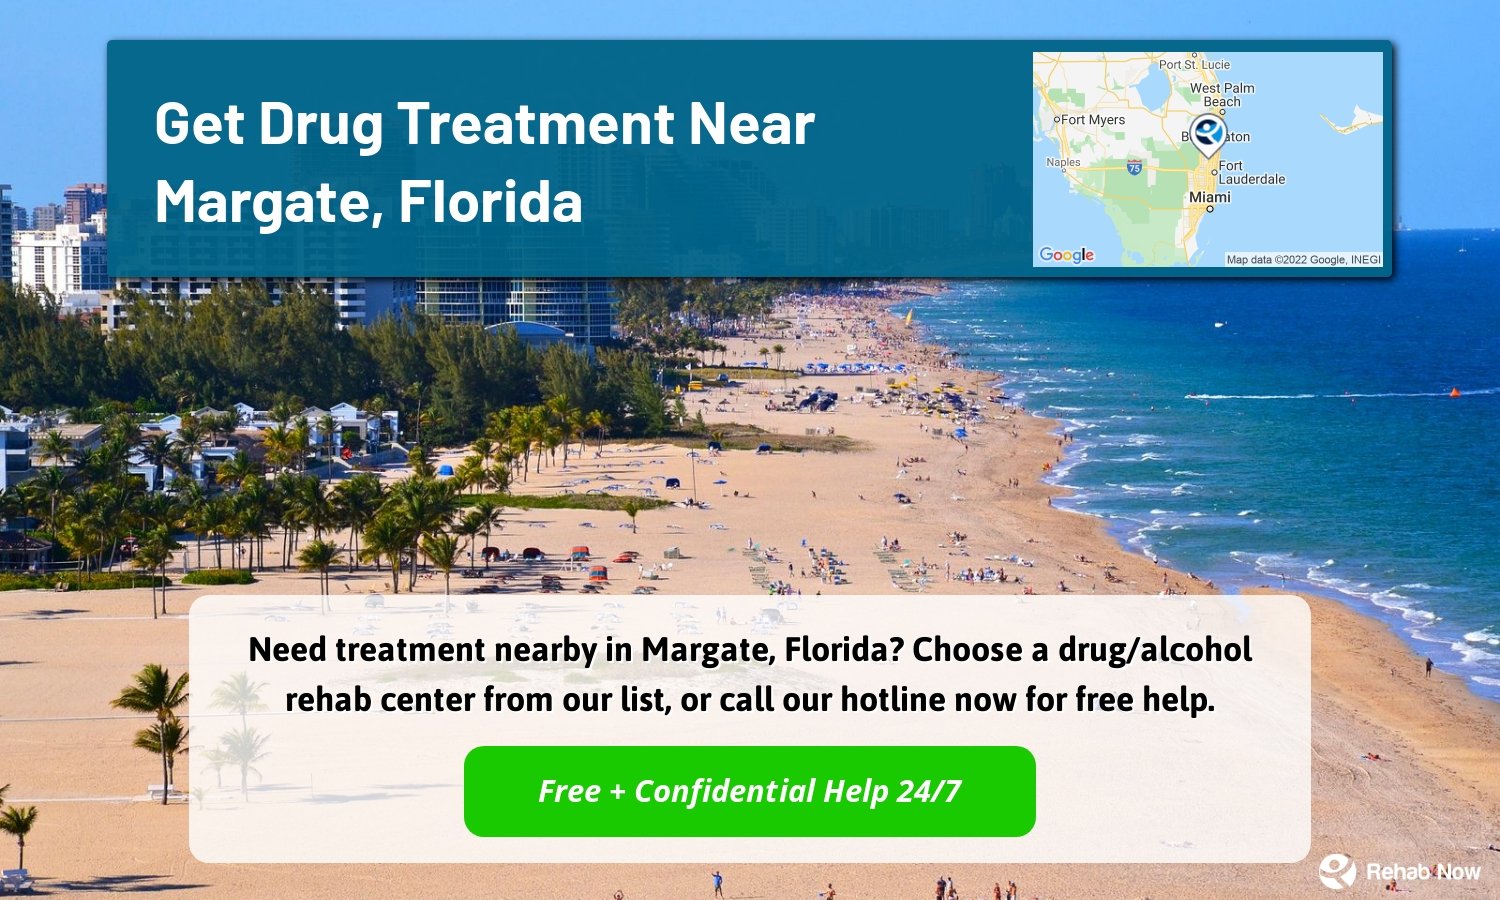 Need treatment nearby in Margate, Florida? Choose a drug/alcohol rehab center from our list, or call our hotline now for free help.